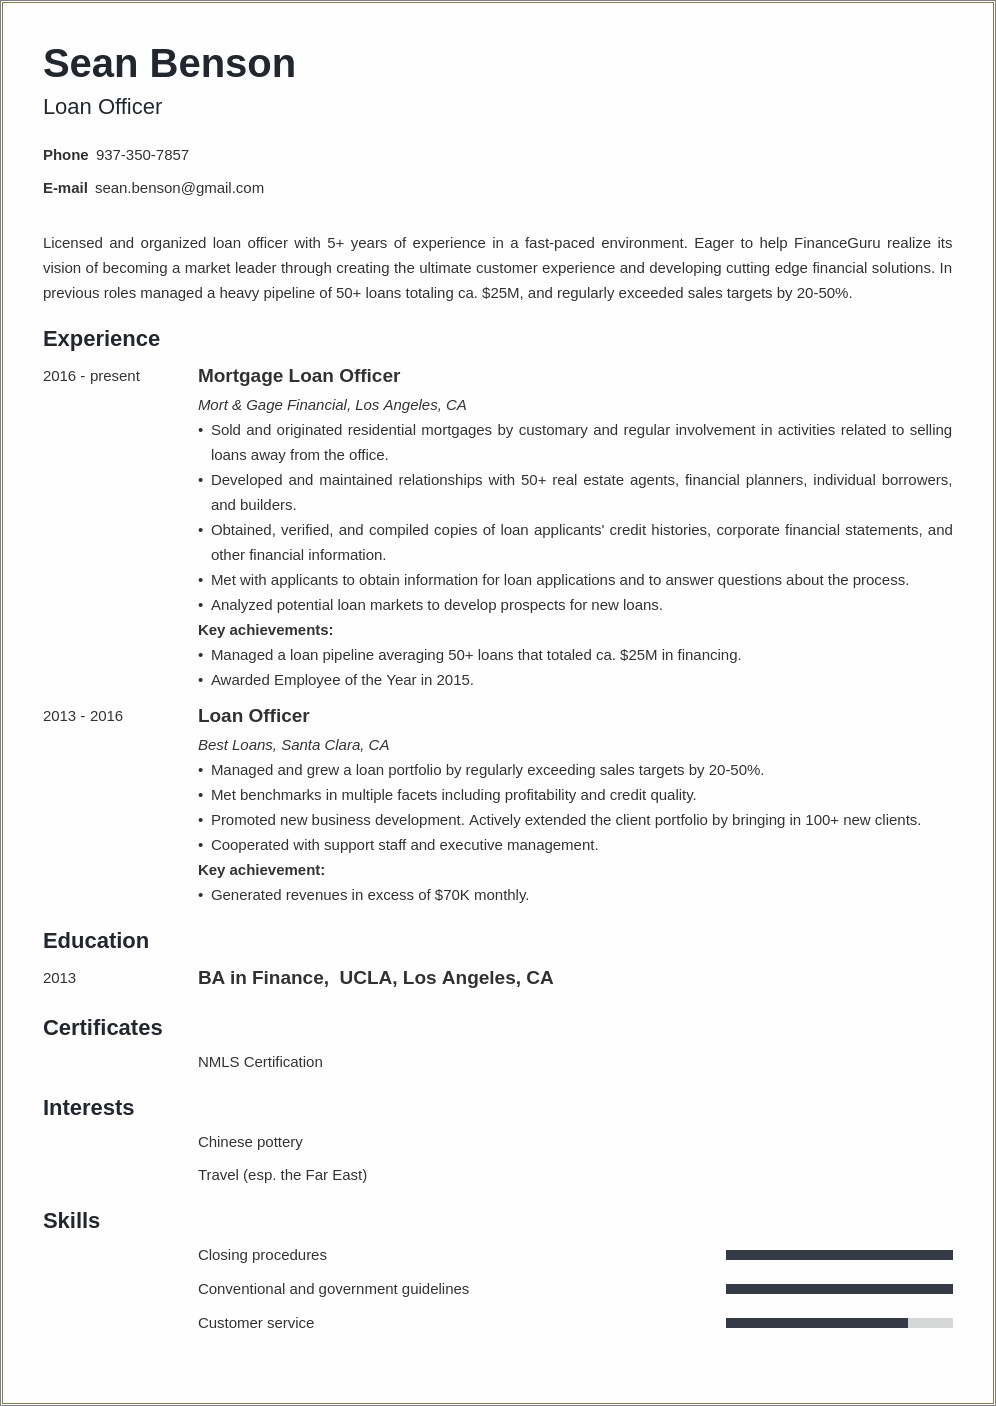 Resume Objective For Mortgage Underwriter Position